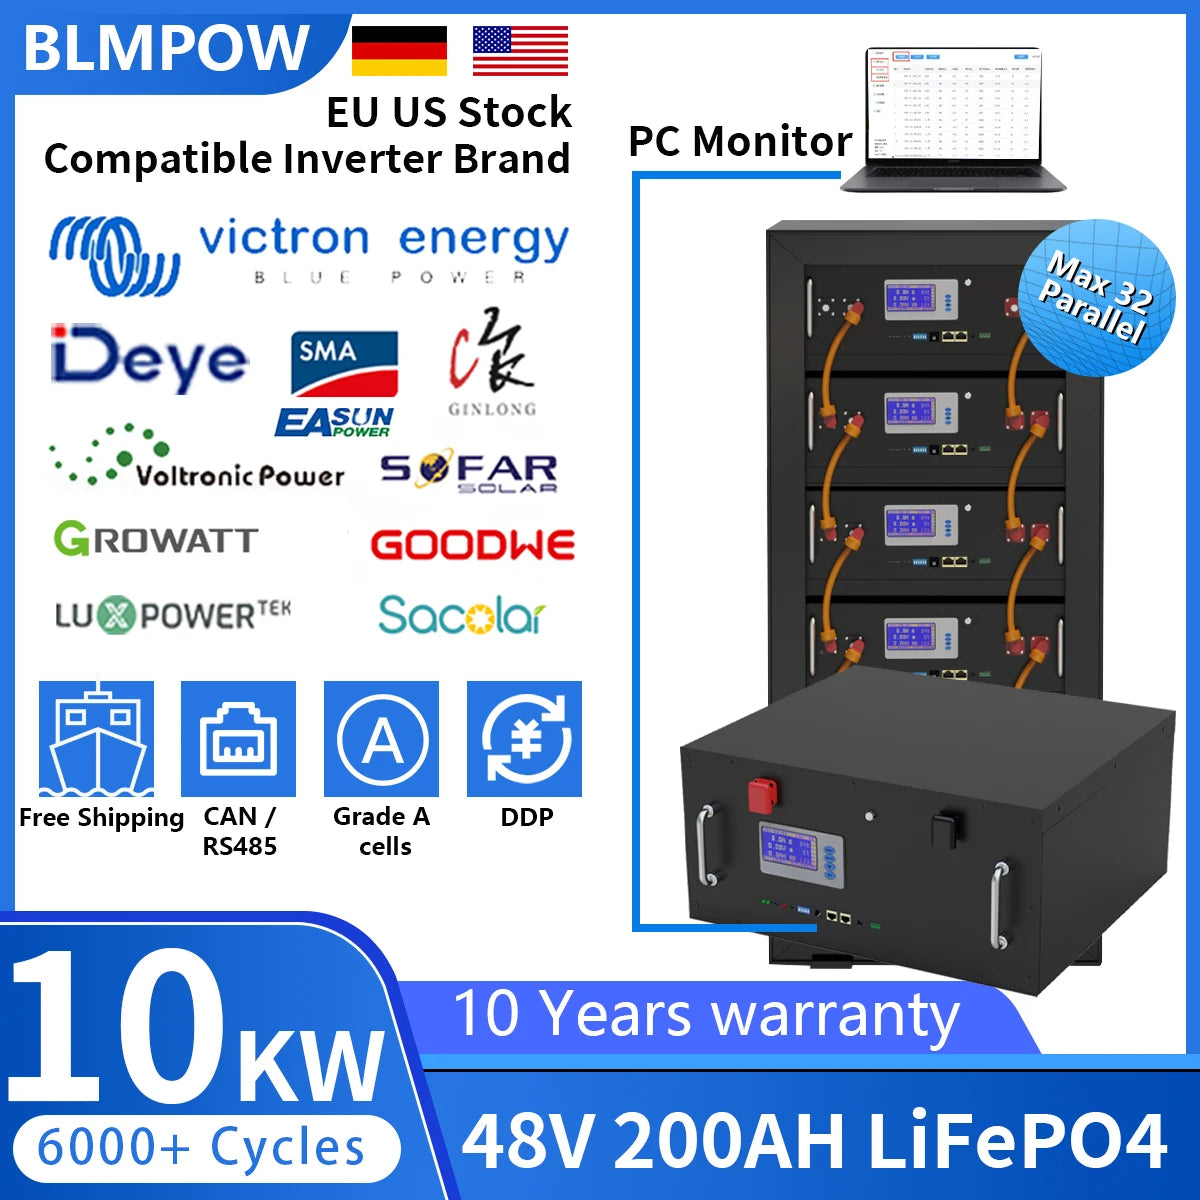 48V 200Ah 100AH LiFePO4 Battery, 48V 200Ah LiFePO4 battery pack compatible with various brands, features parallel connections and CAN/RS485 communication.